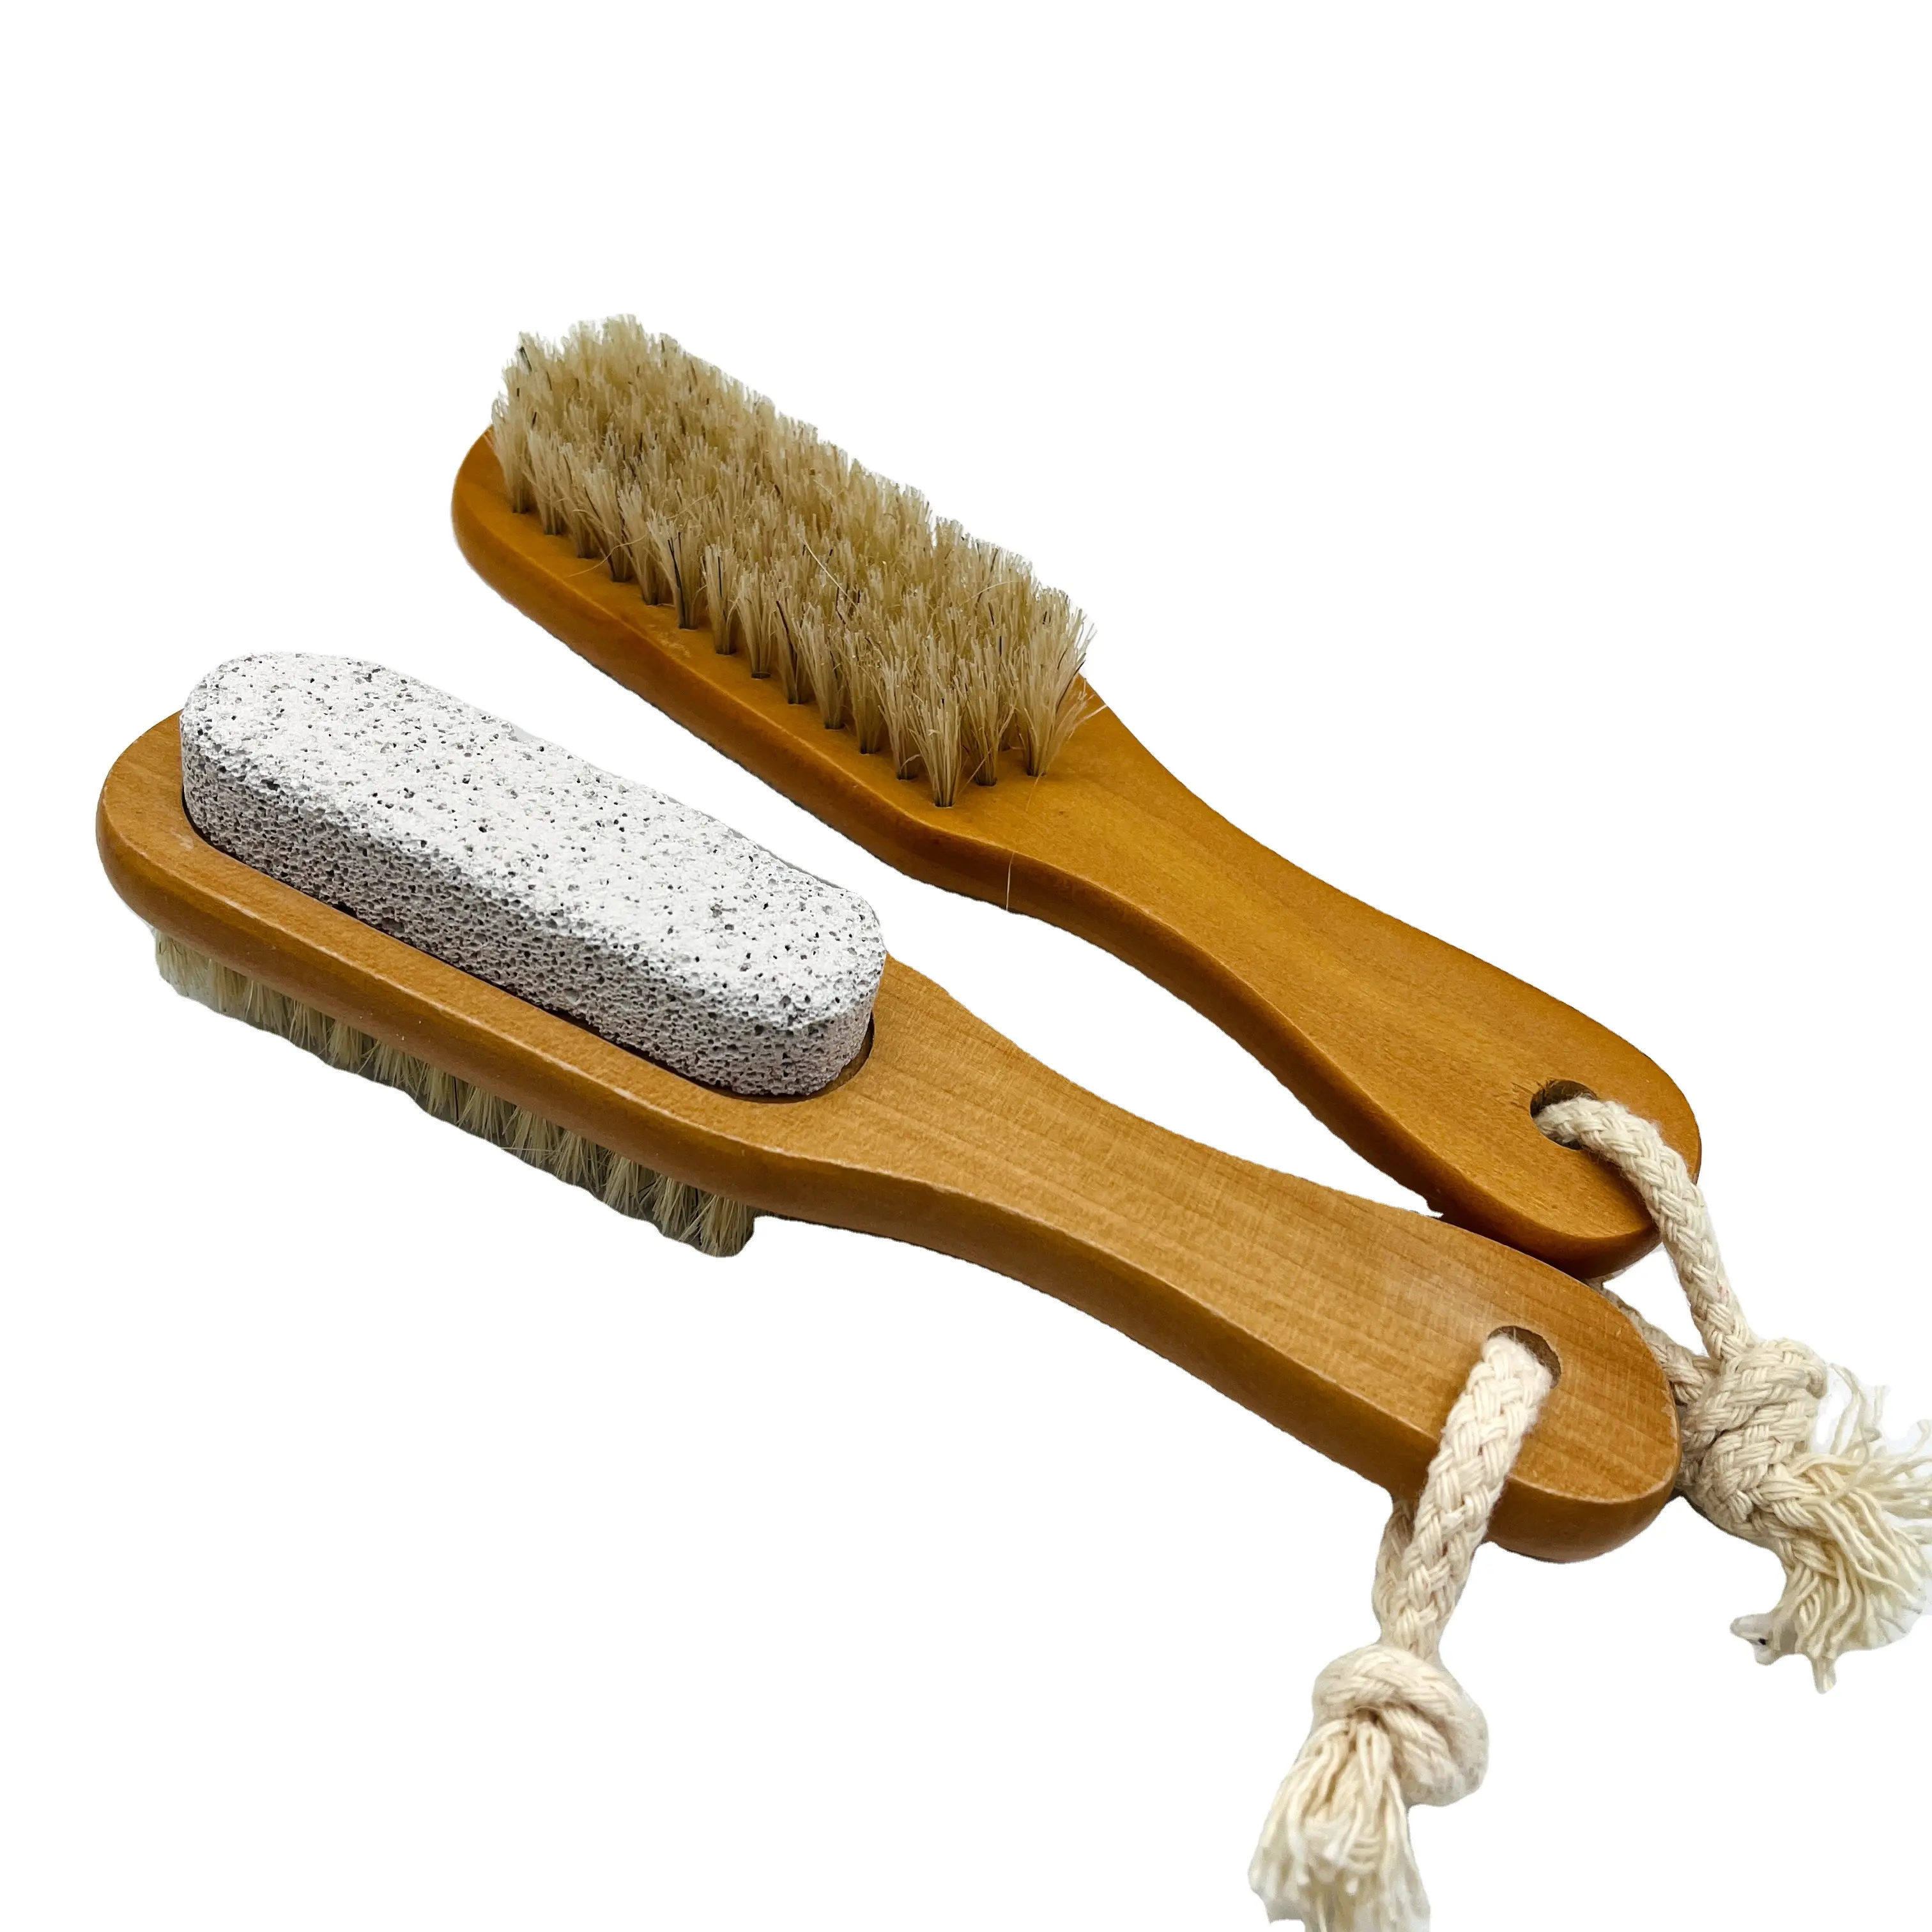 Foot Scrubber Feet Shower Spa Easy Feet Cleaning Brush Exfoliating Foot Massager with pumice stone